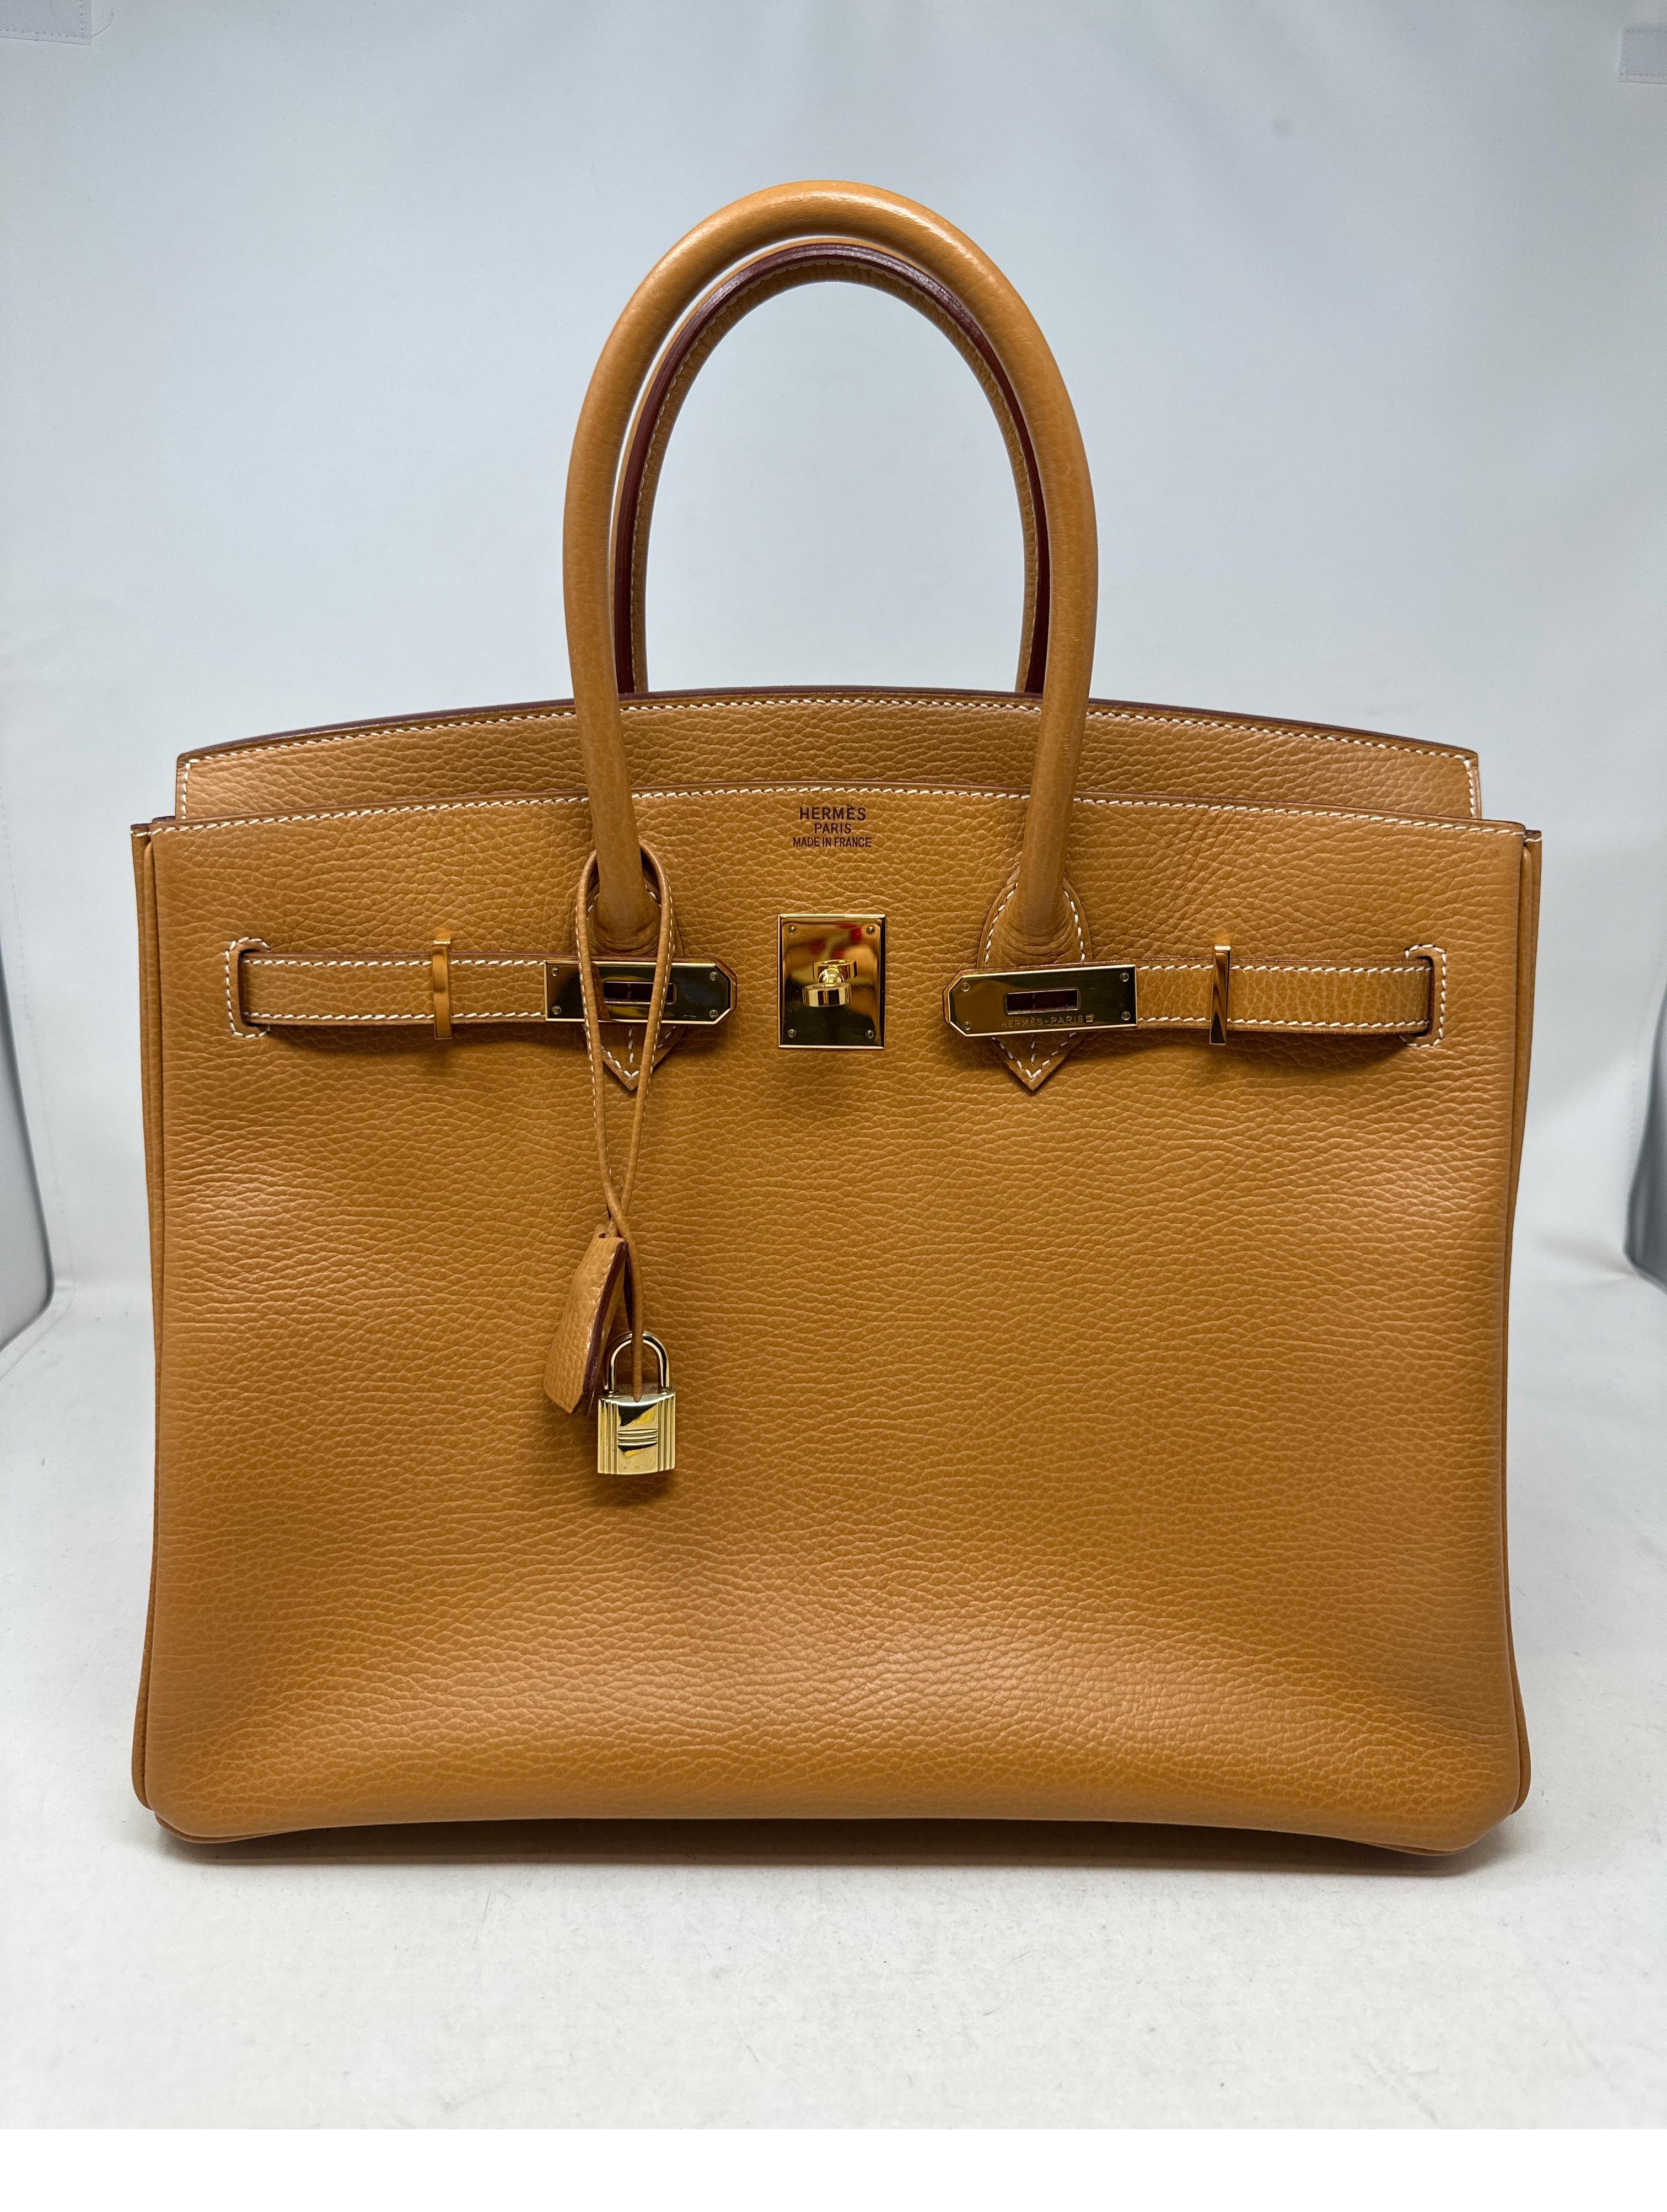 Hermes Natural Birkin 35 Bag. Gold hardware. Vintage courcheval leather. Interior clean. Excellent condition for vintage. Beautiful tan color. Includes clochette, lock, keys, and dust bag. Guaranteed authentic. 